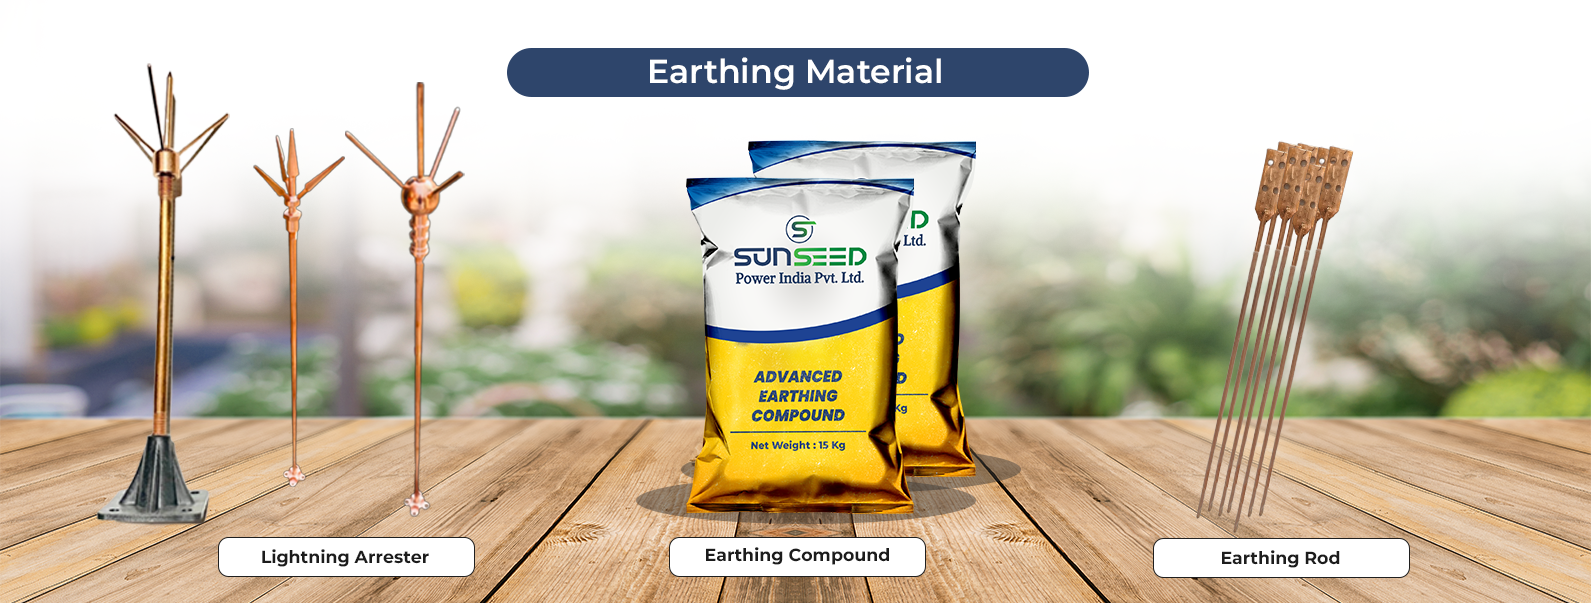 earthing material